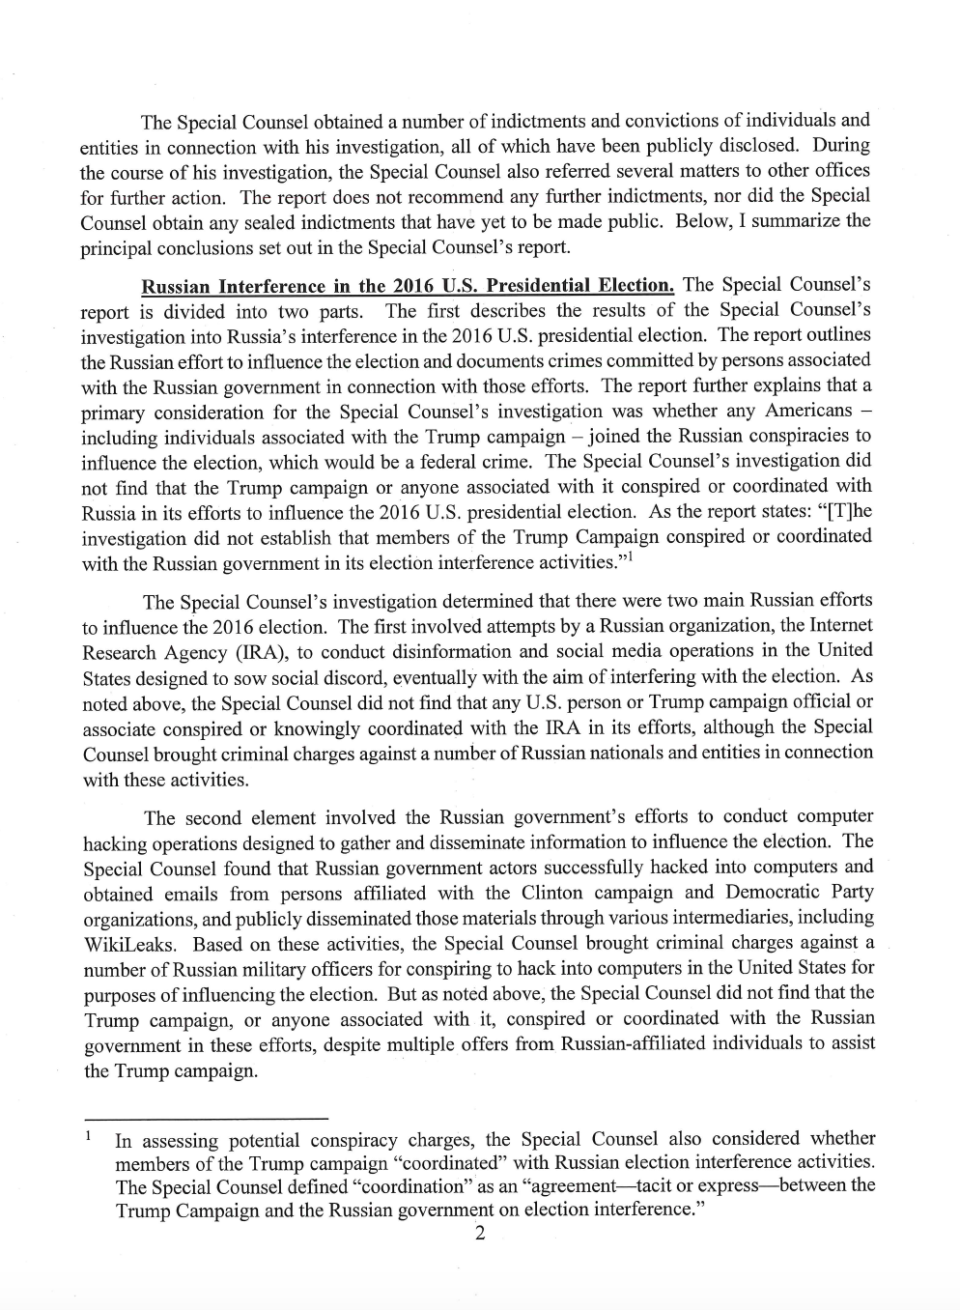 Page 2 of Attorney General William Barr's letter to Congress on Special Counsel Robert Mueller's report.